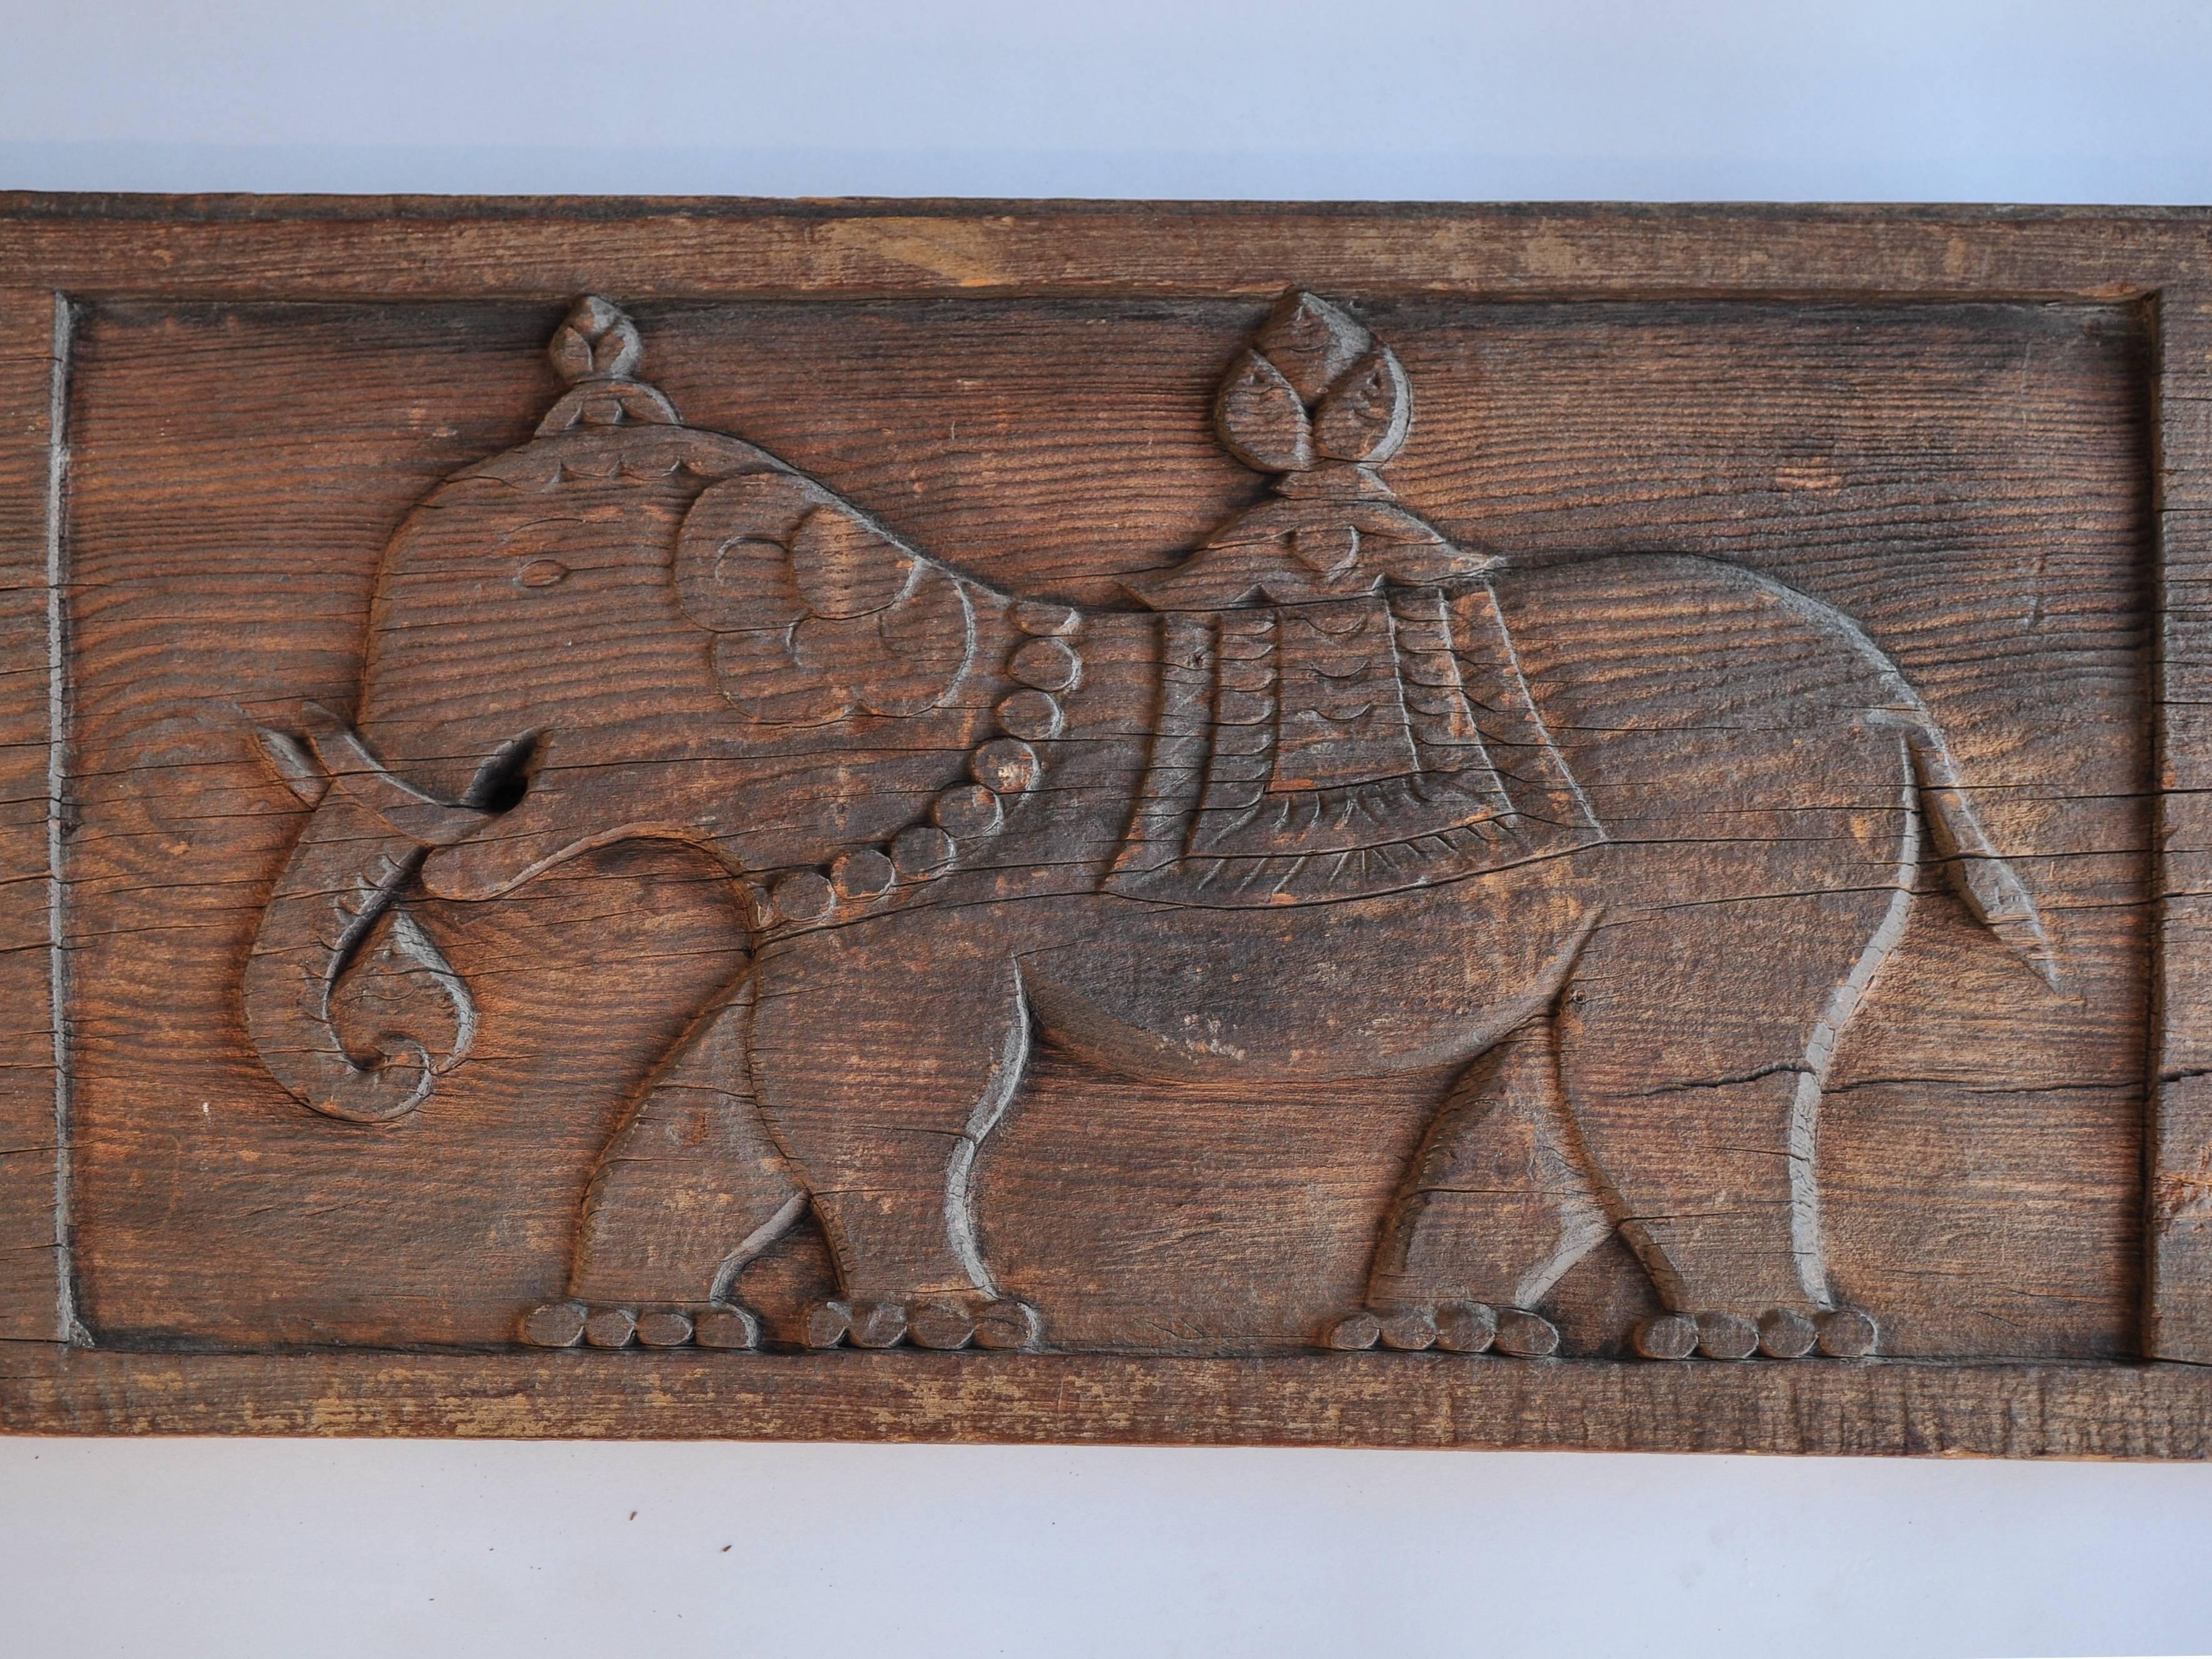 Carved Tibet architectural panel elephant and bird motifs early to mid-20th century.
This charming panel, carved from a plank of pine wood, would have adorned a Tibetan home or temple. Elephants, of course, are widely loved and regarded as highly